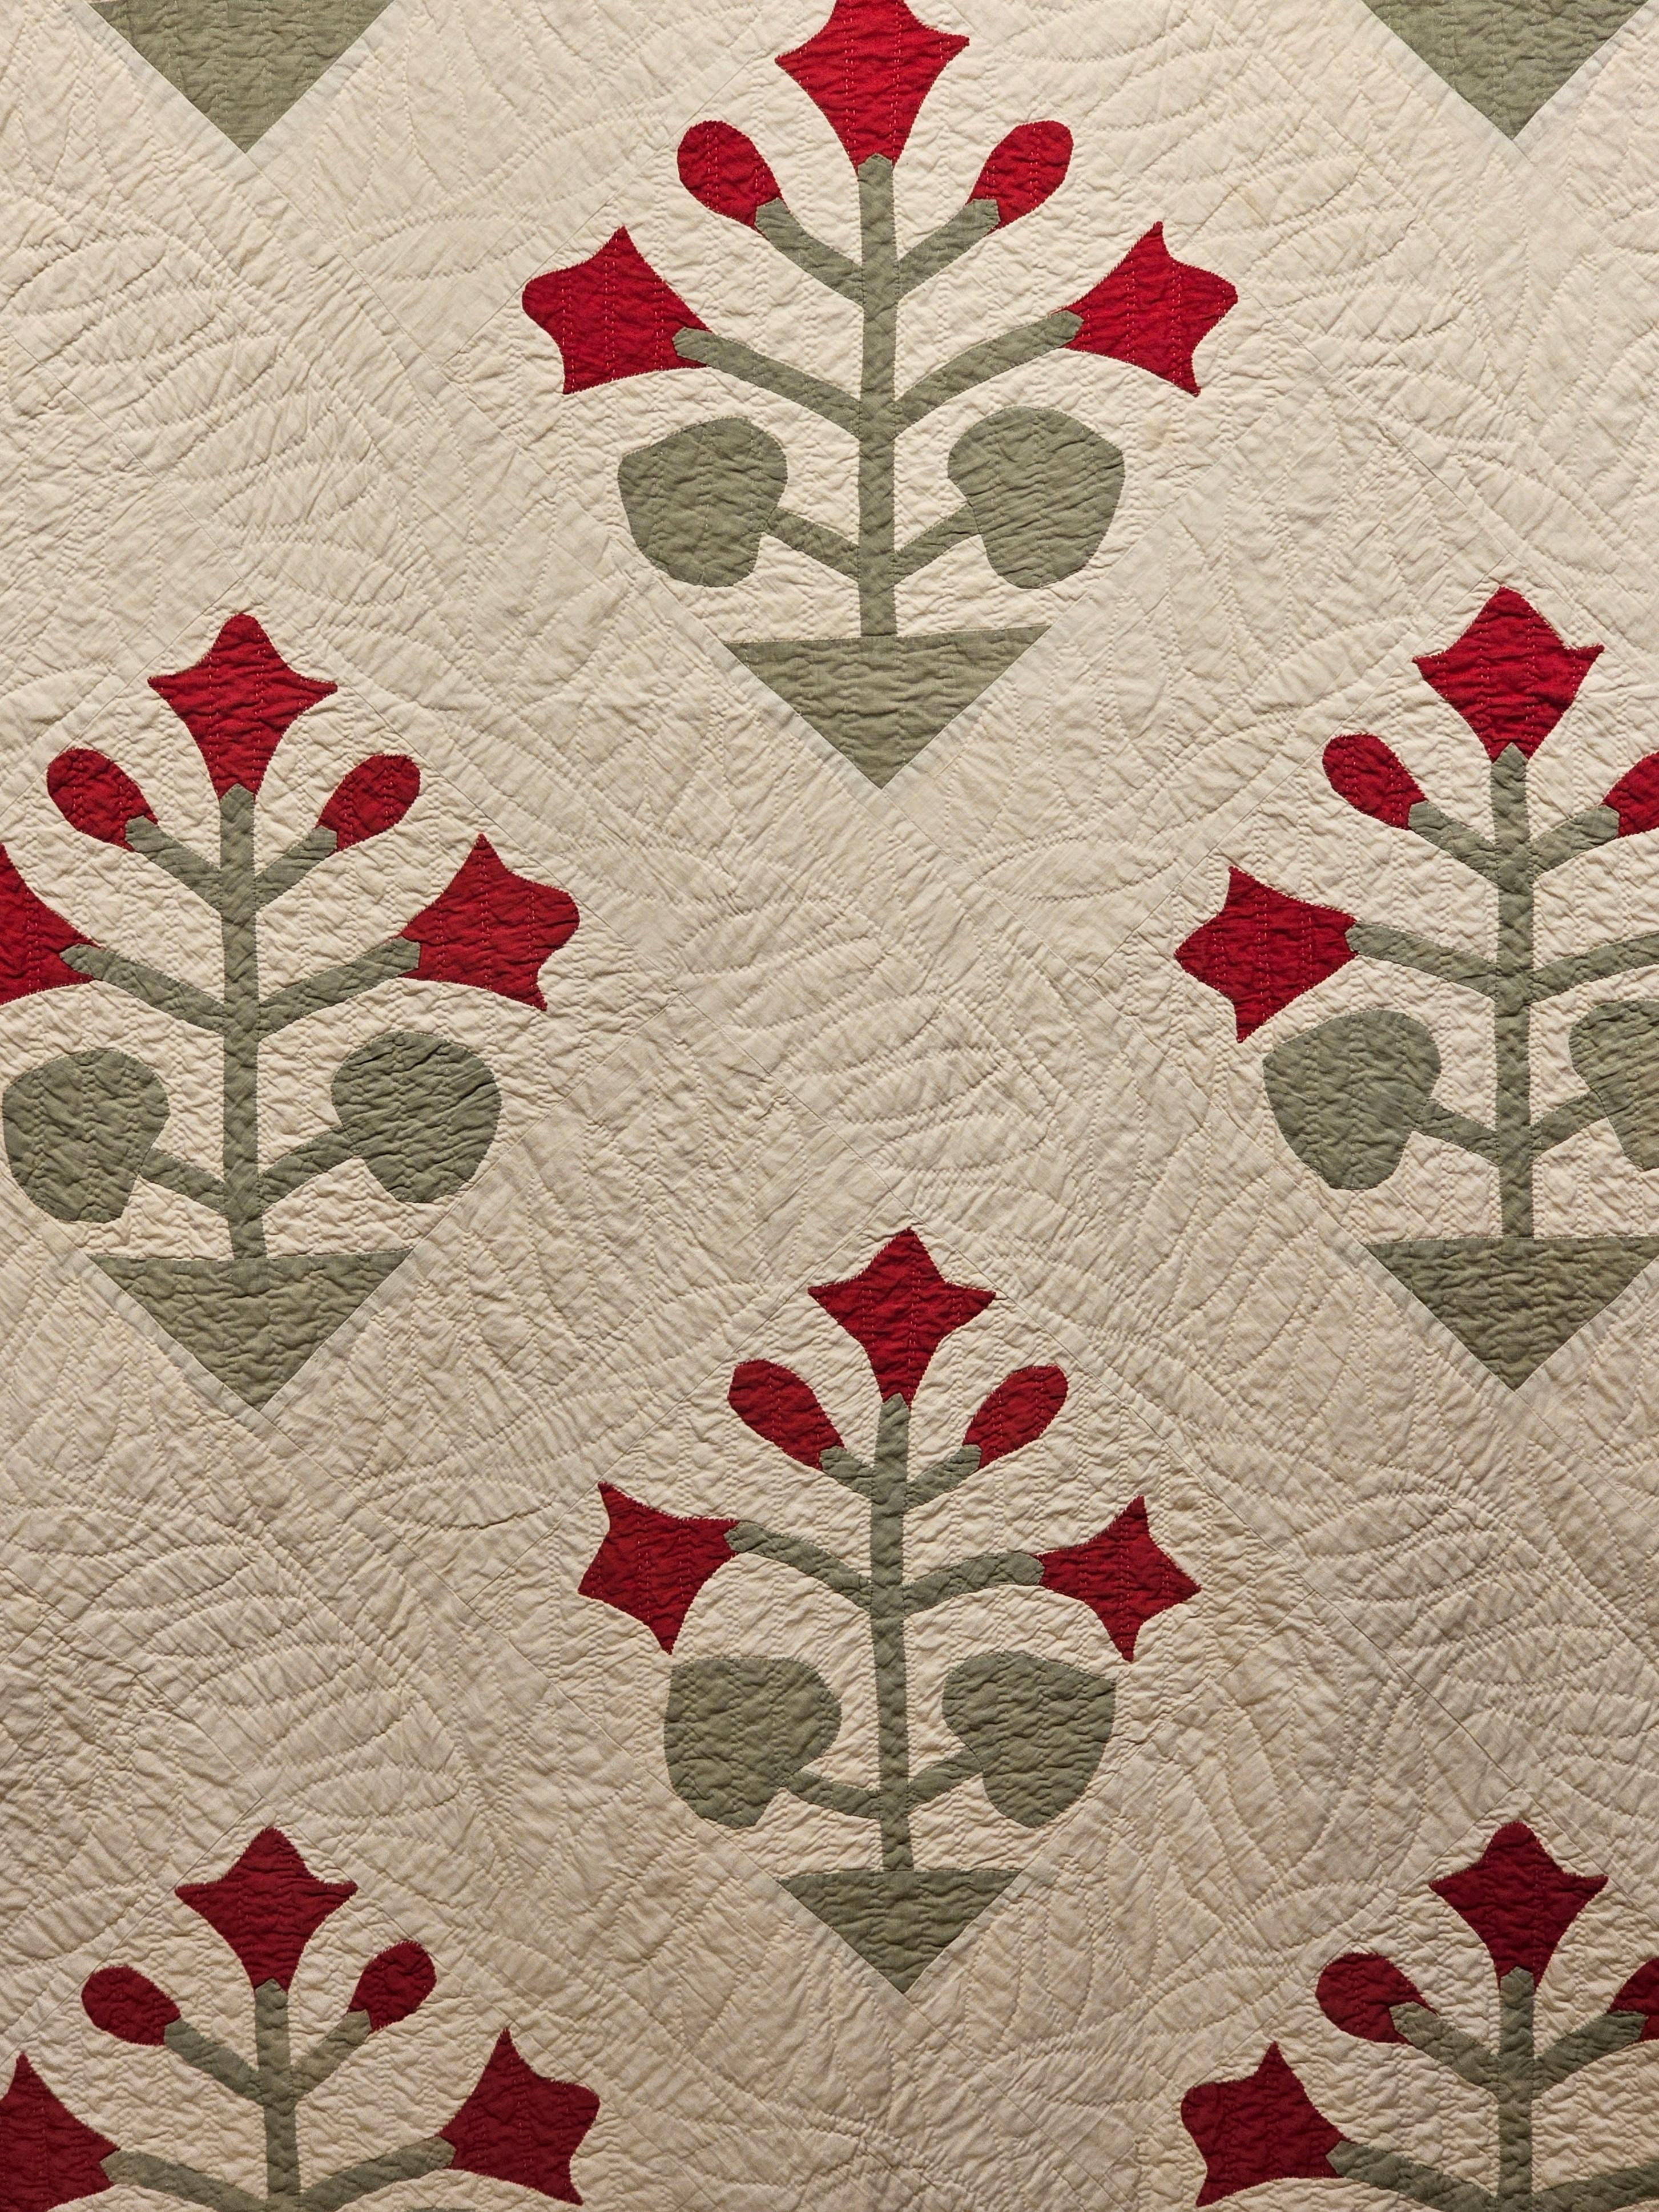 19th Century American Applique Quilt in Floral Pattern in Ivory, Red, and Green 2